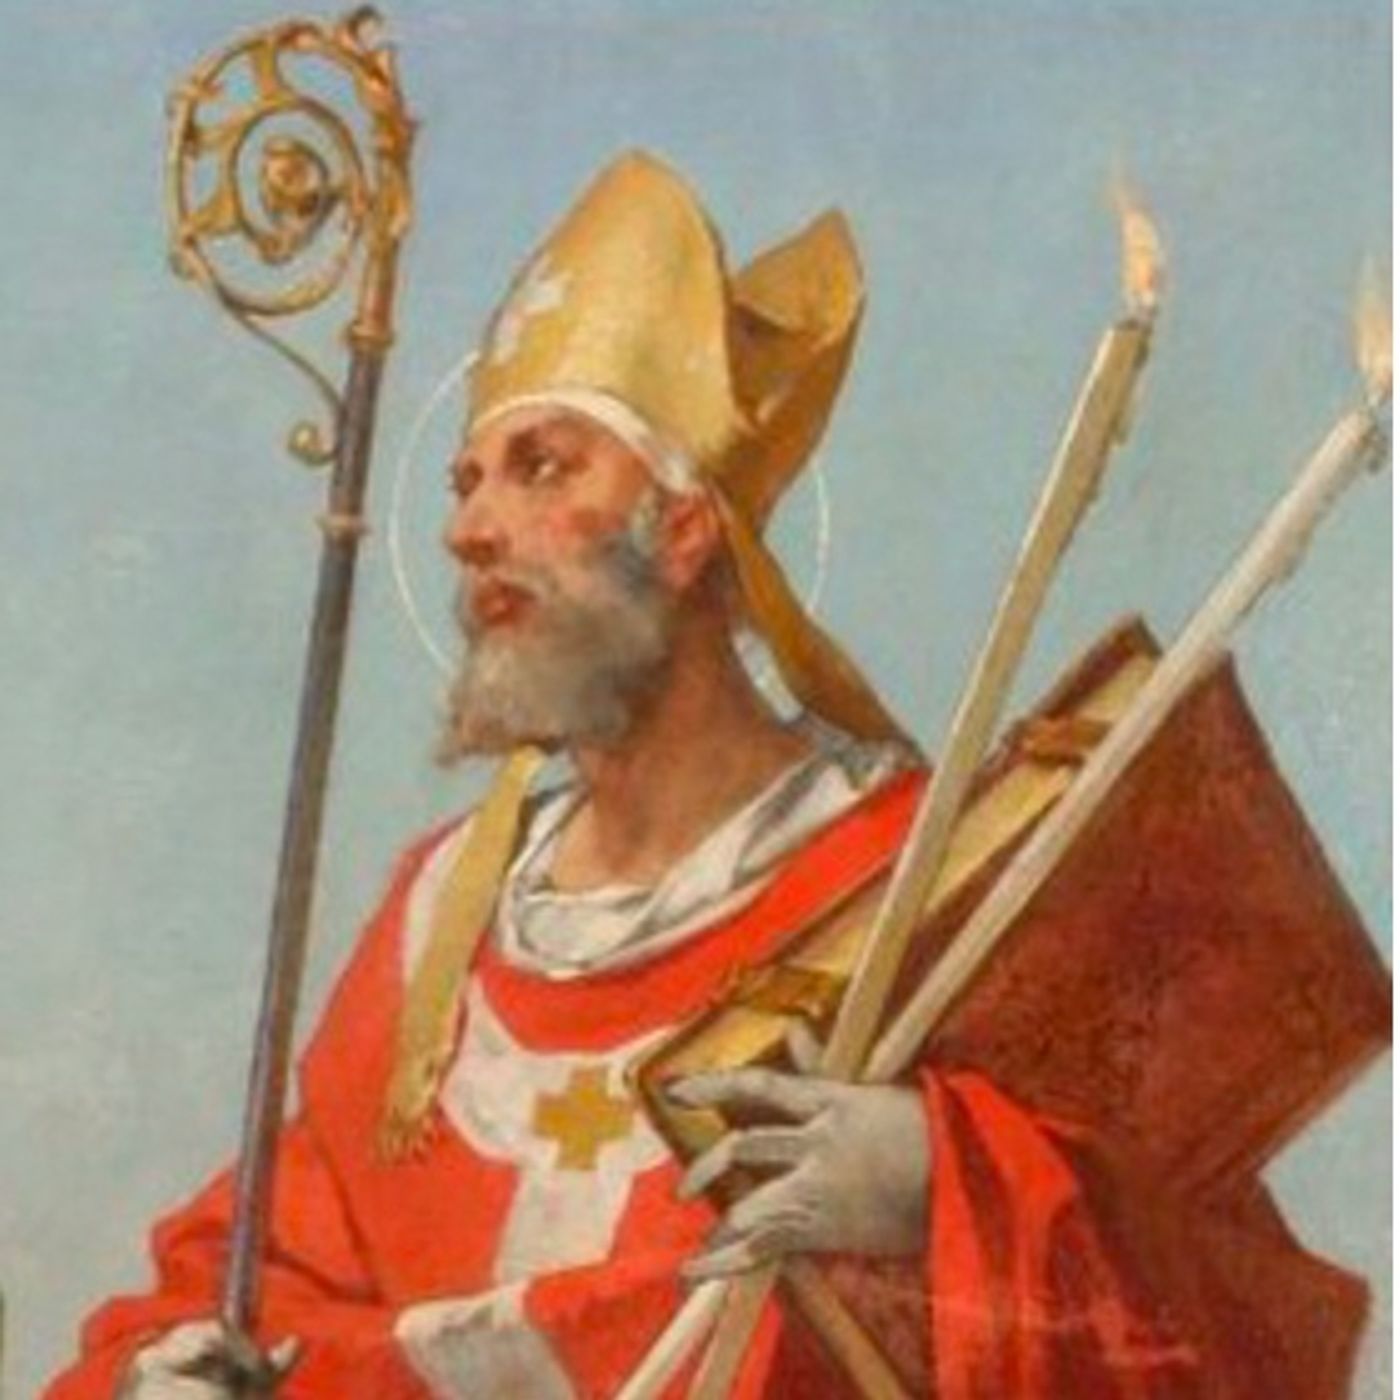 February 3: Saint Blaise, Bishop and Martyr